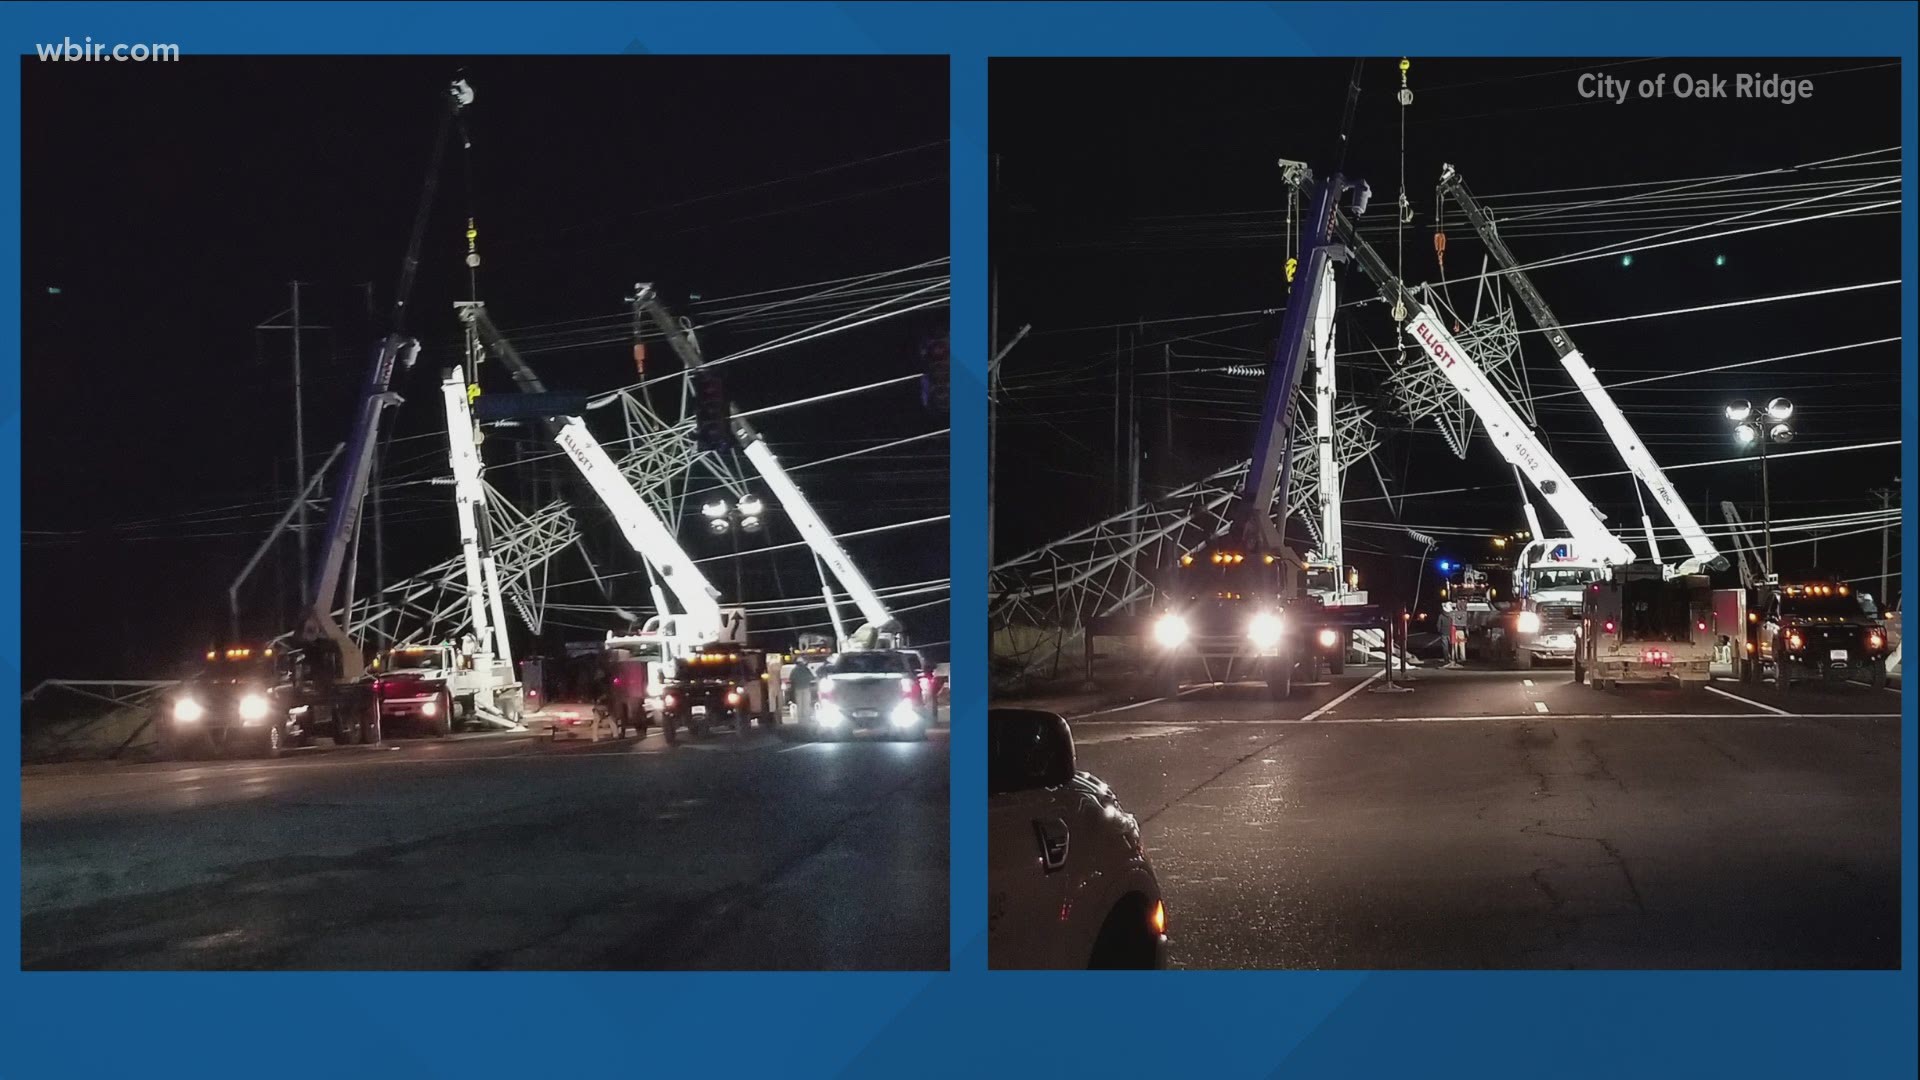 The road where a transmission tower fell in Oak Ridge was closed Saturday evening as crews worked to remove and repair it.